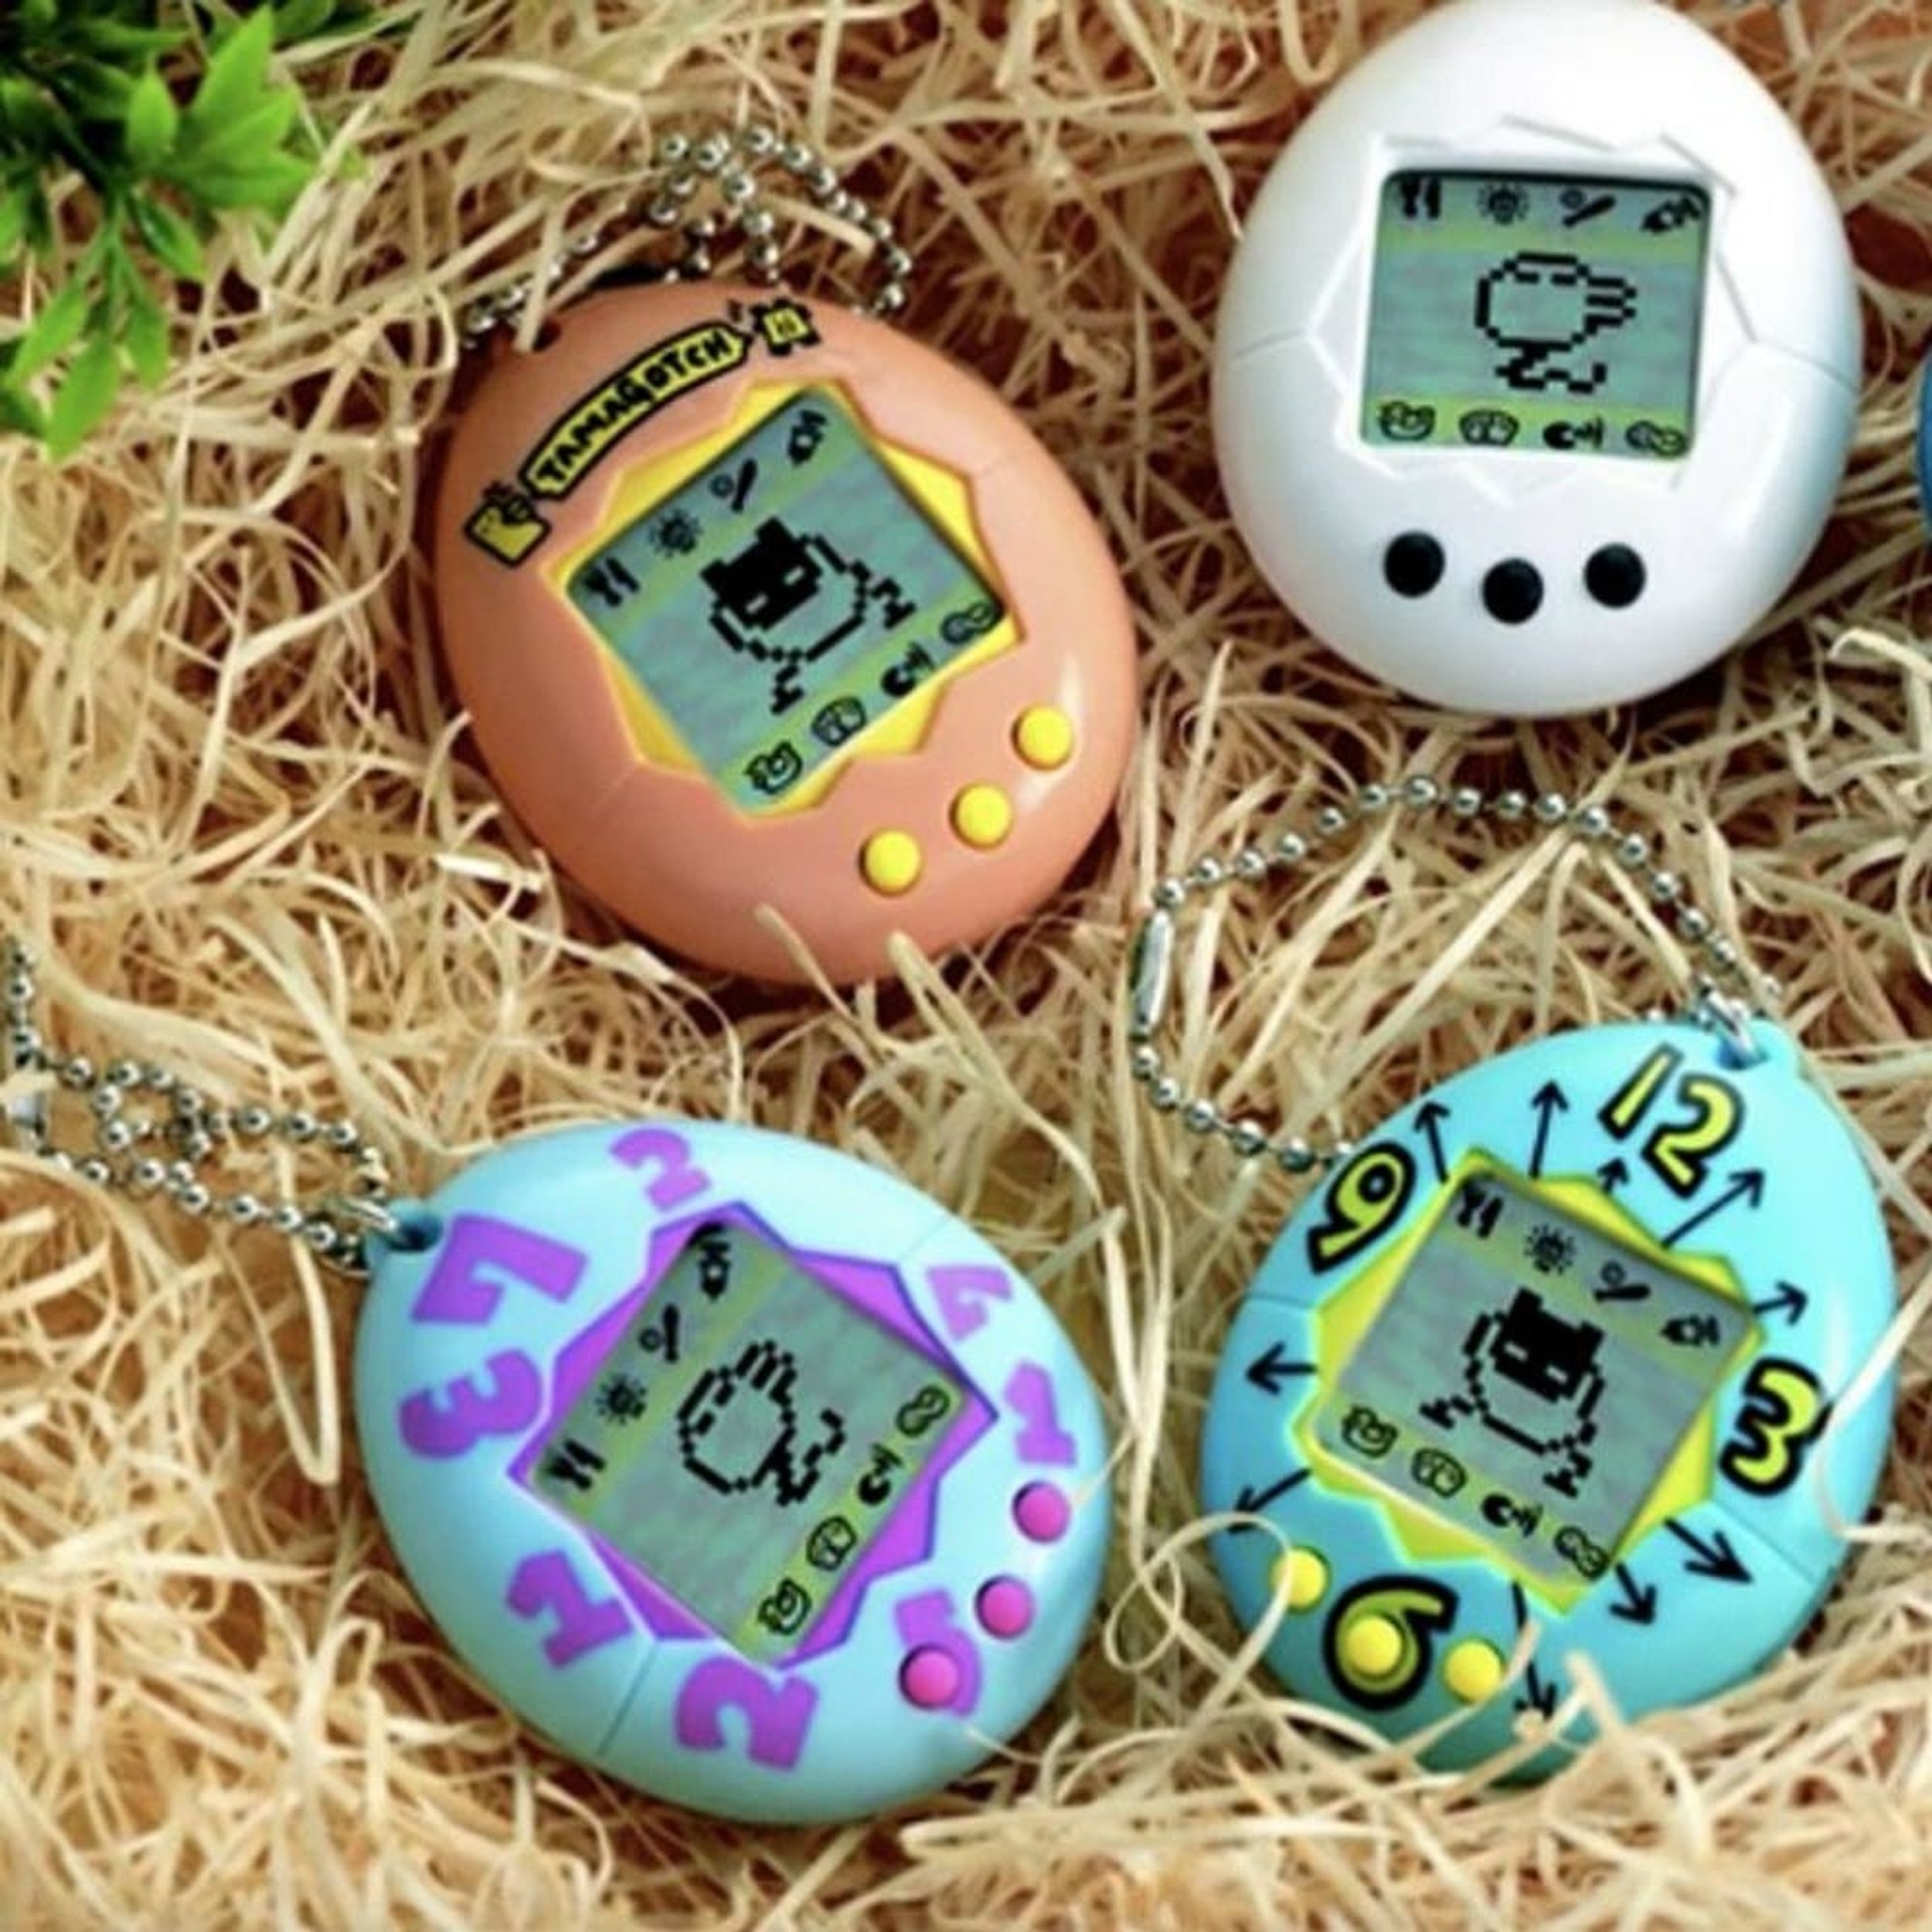 OMG! The Original Tamagotchi Is Getting a Re-release